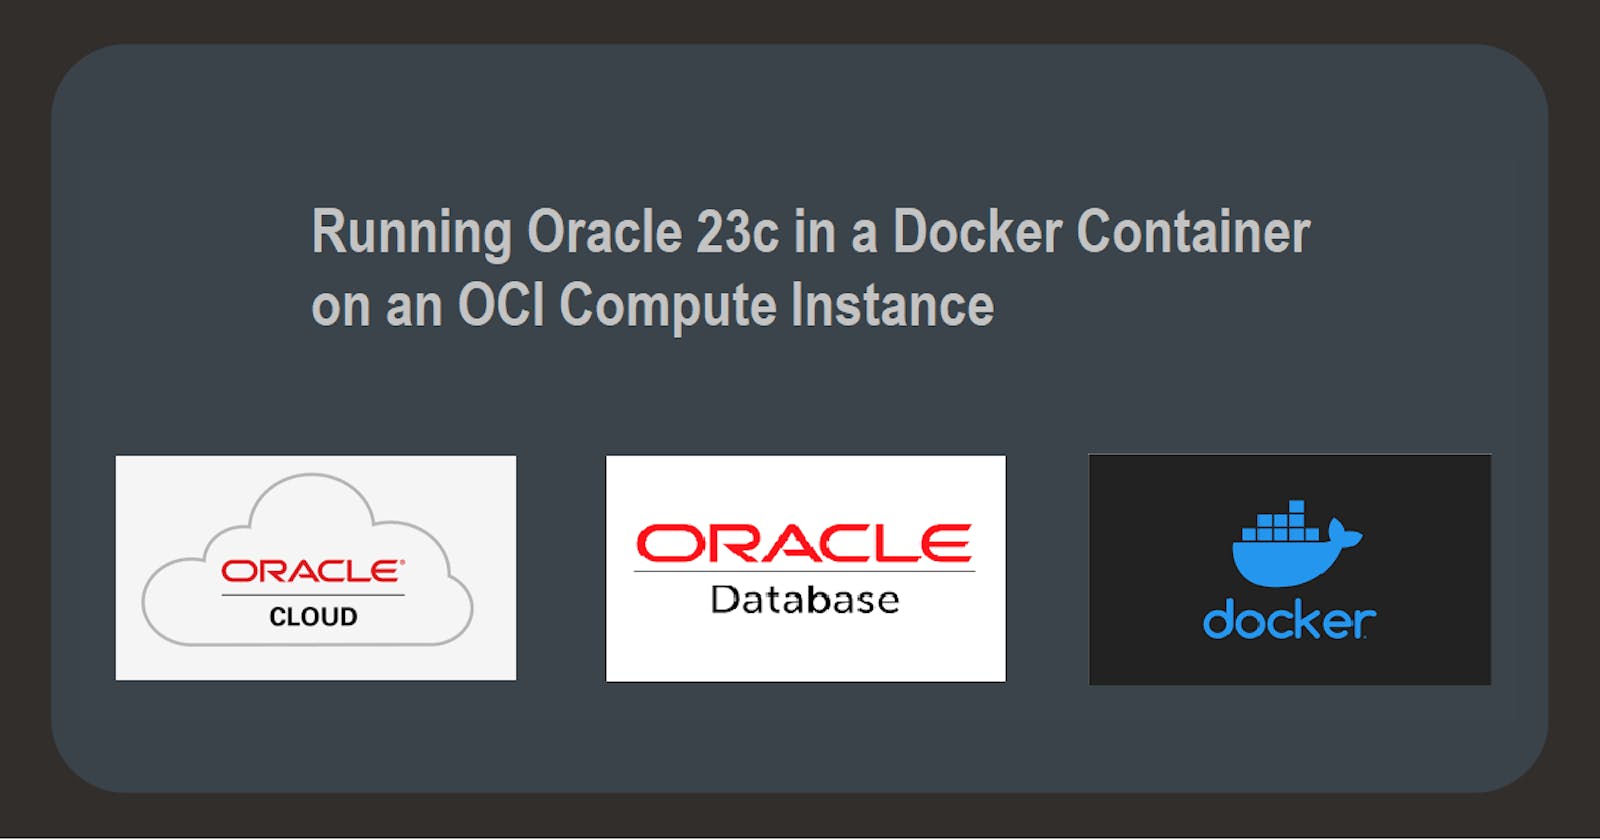 Running Oracle 23c in a docker container on an OCI compute instance